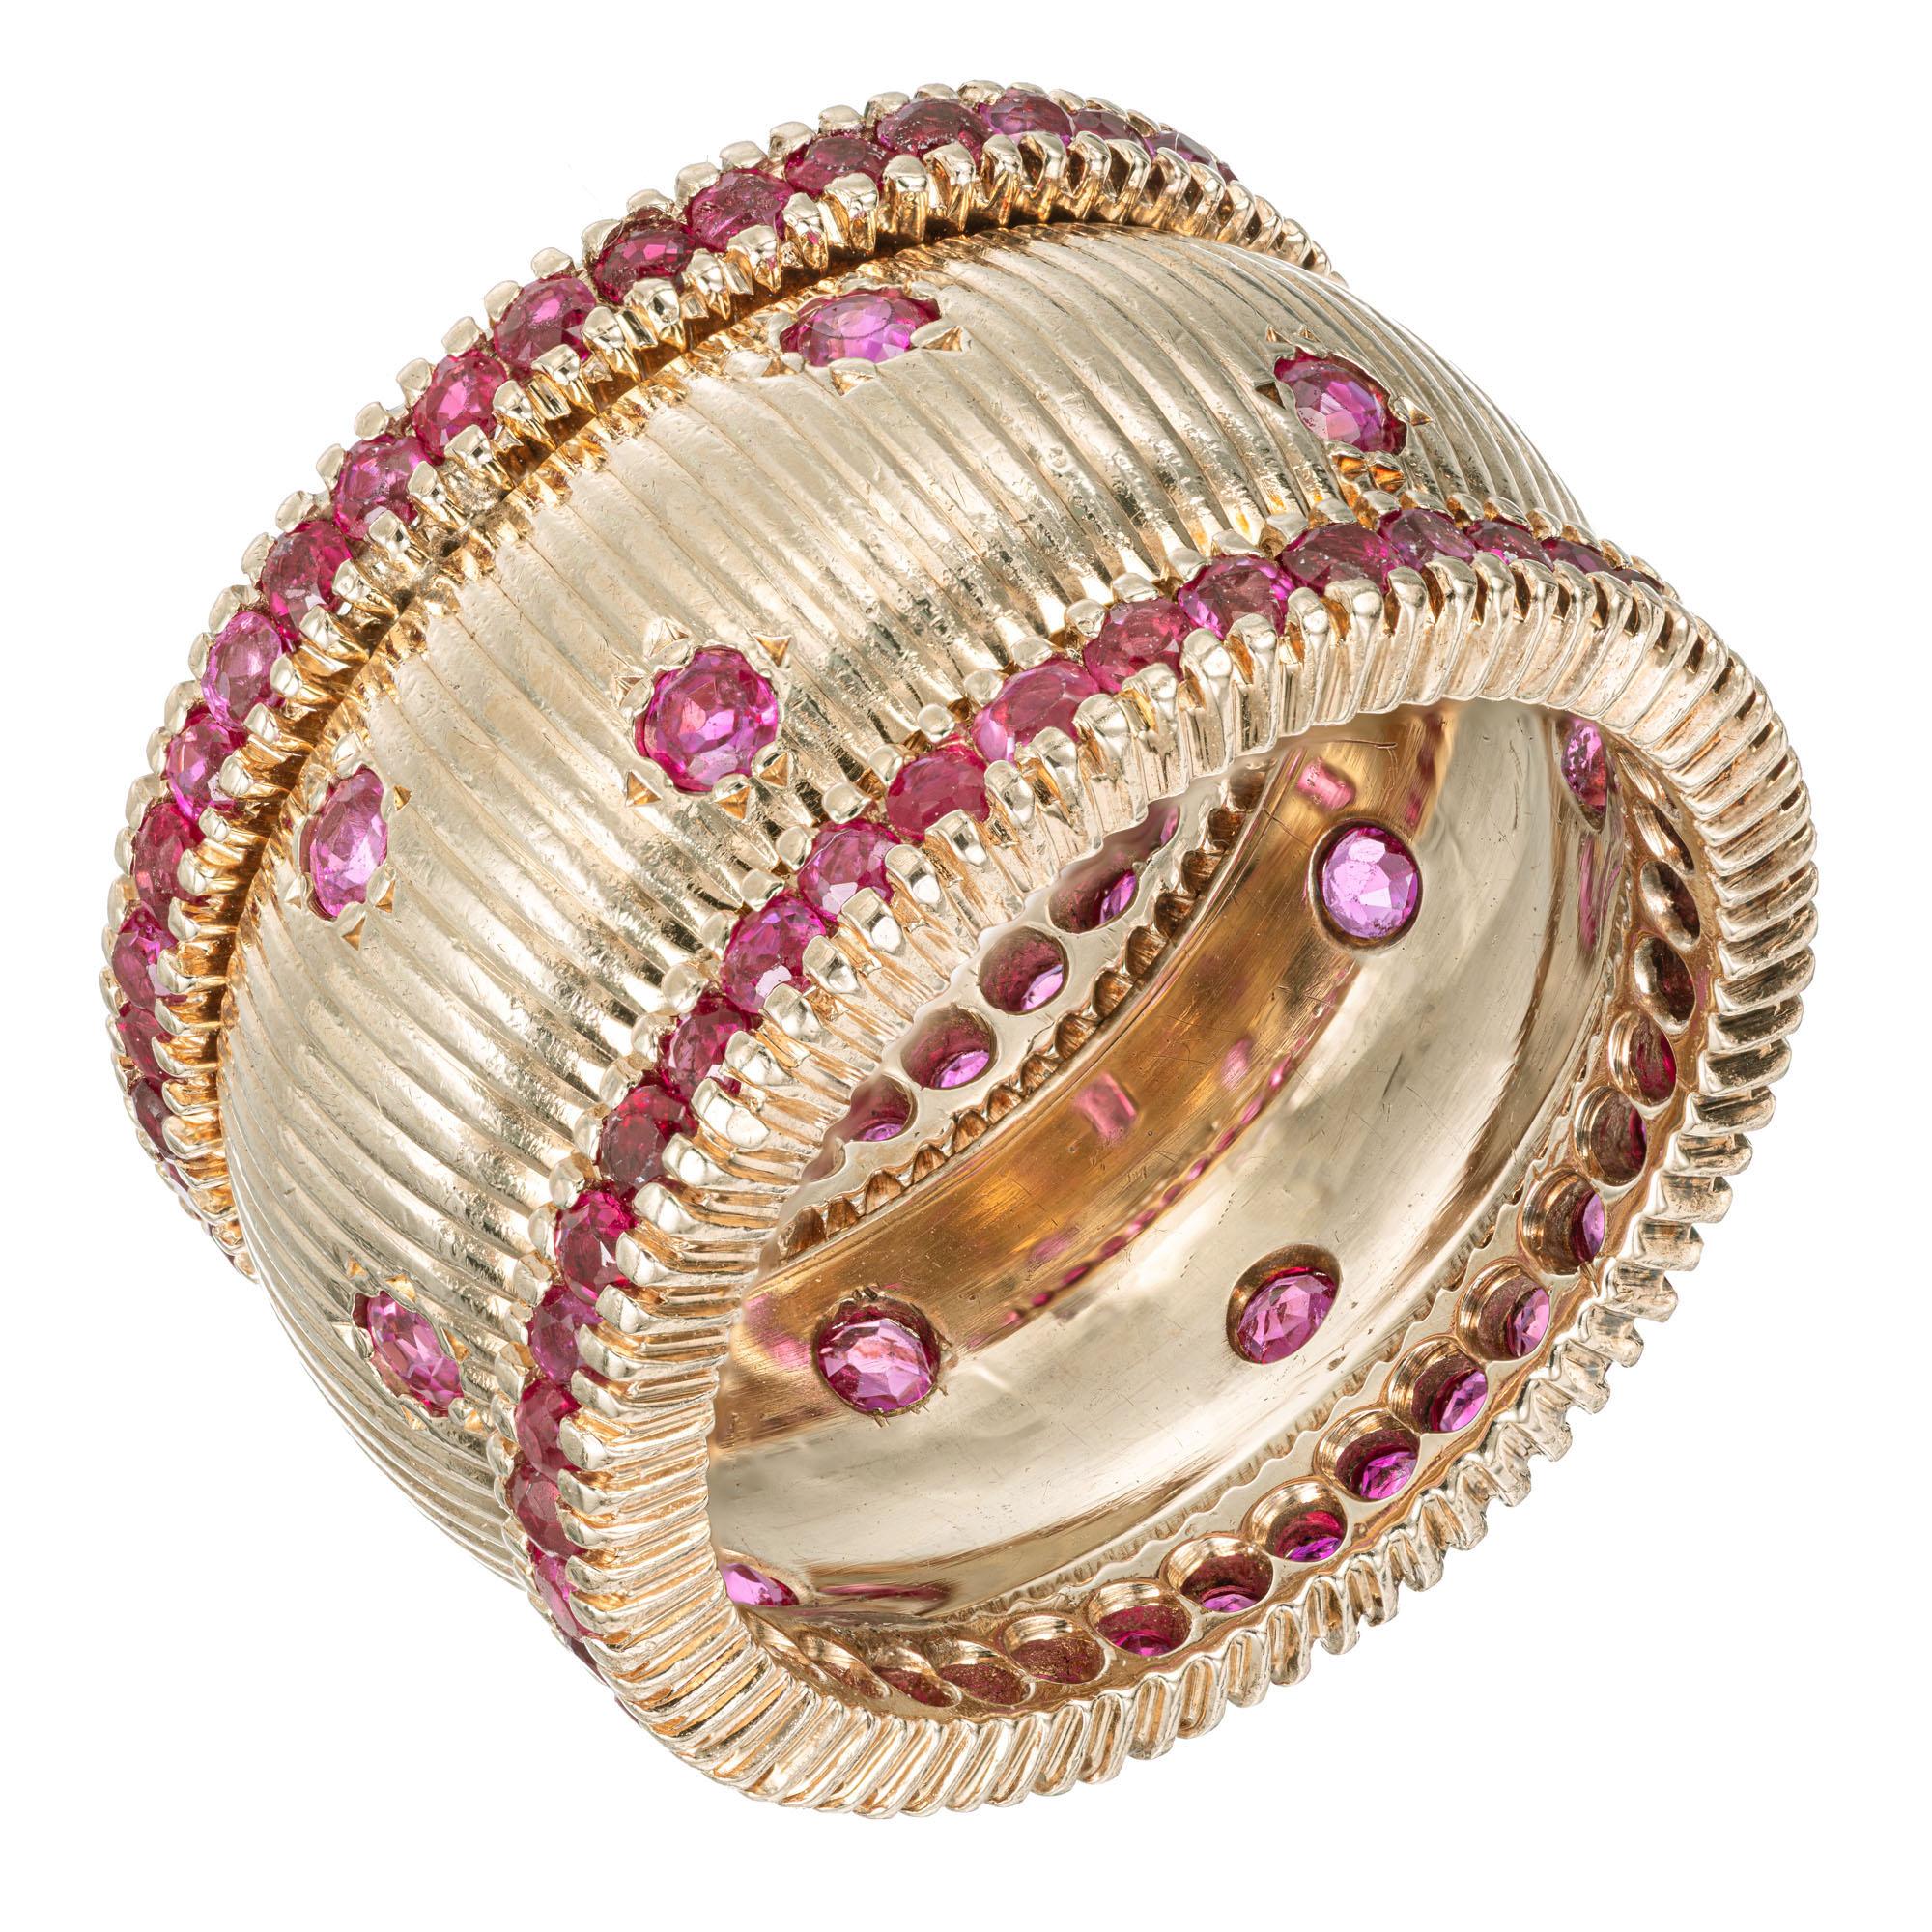 1950's Ruby yellow gold band ring. 76 round rubies along both rims of the setting accented with 12 round rubies along the 14k rose gold wide textured setting. 

12 round Rubies, approx. total weight .60cts, VS-SI, 2mm, genuine bright
76 round